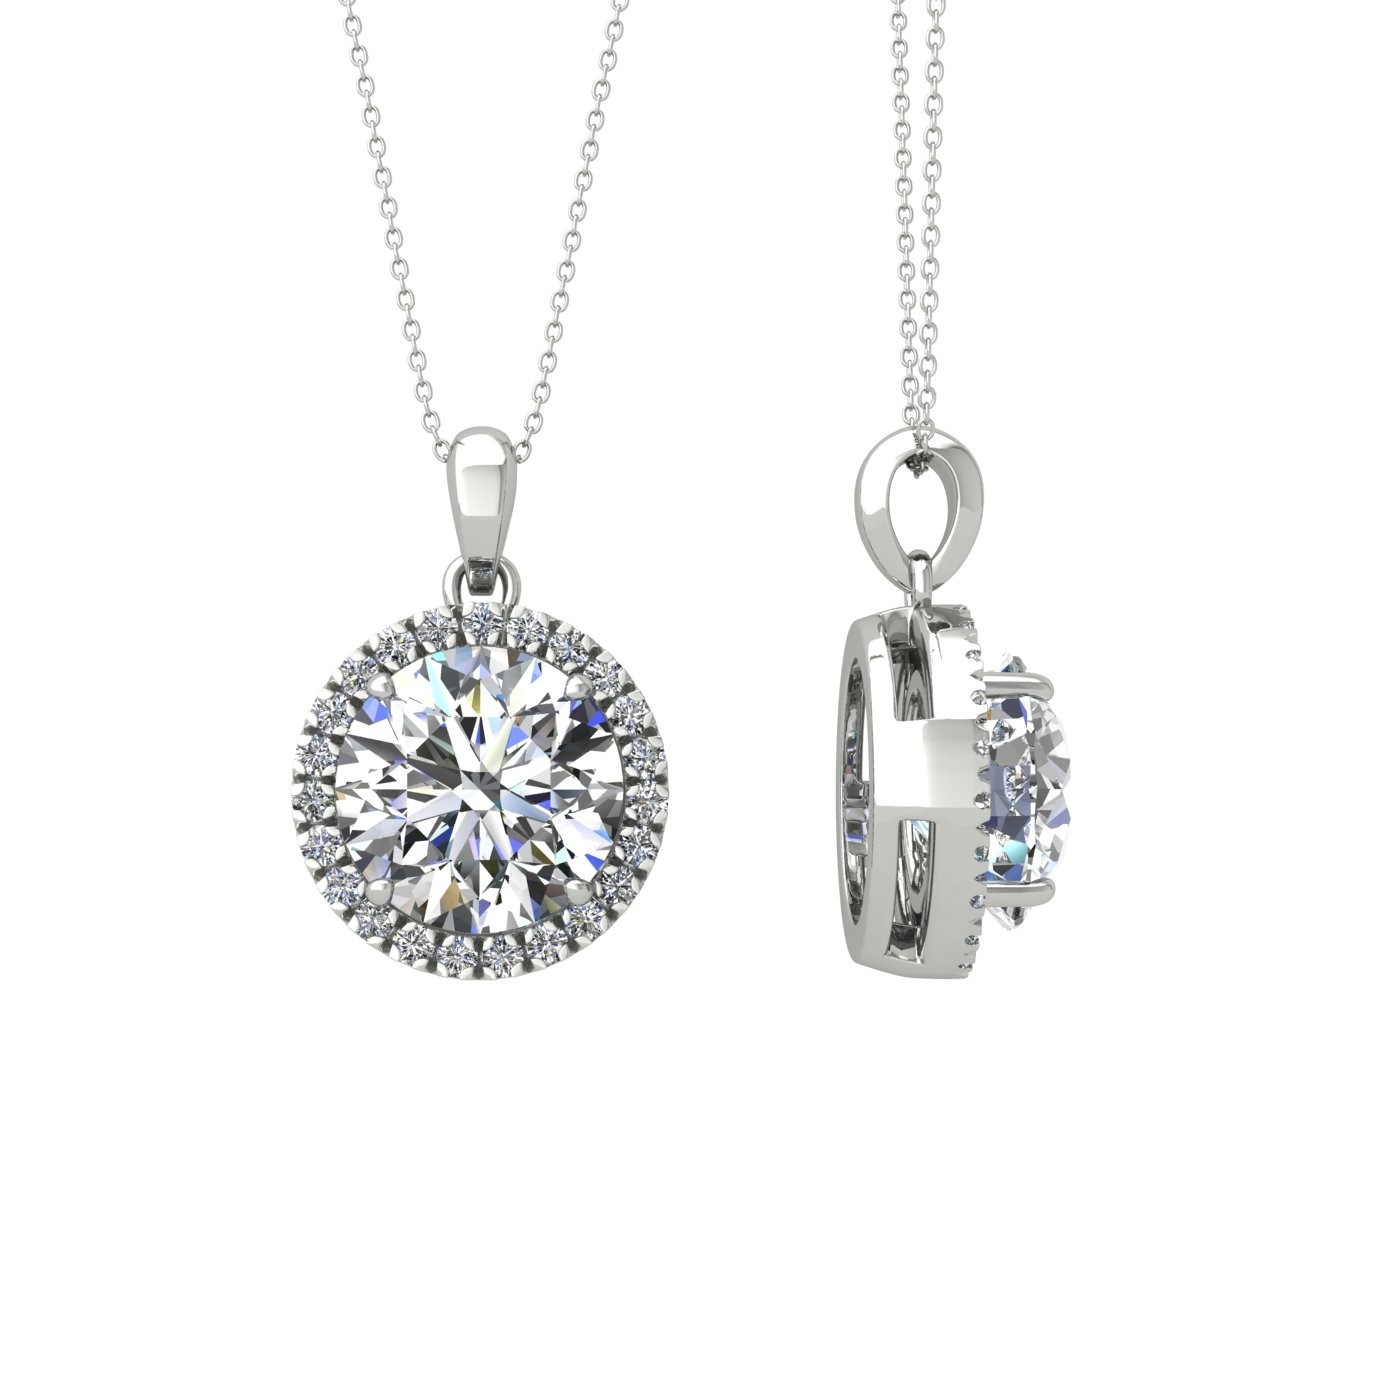 18k white gold 1 ct 4 prong round shape diamond pendant with diamond pavÉ set halo including chain seperate from the pendant